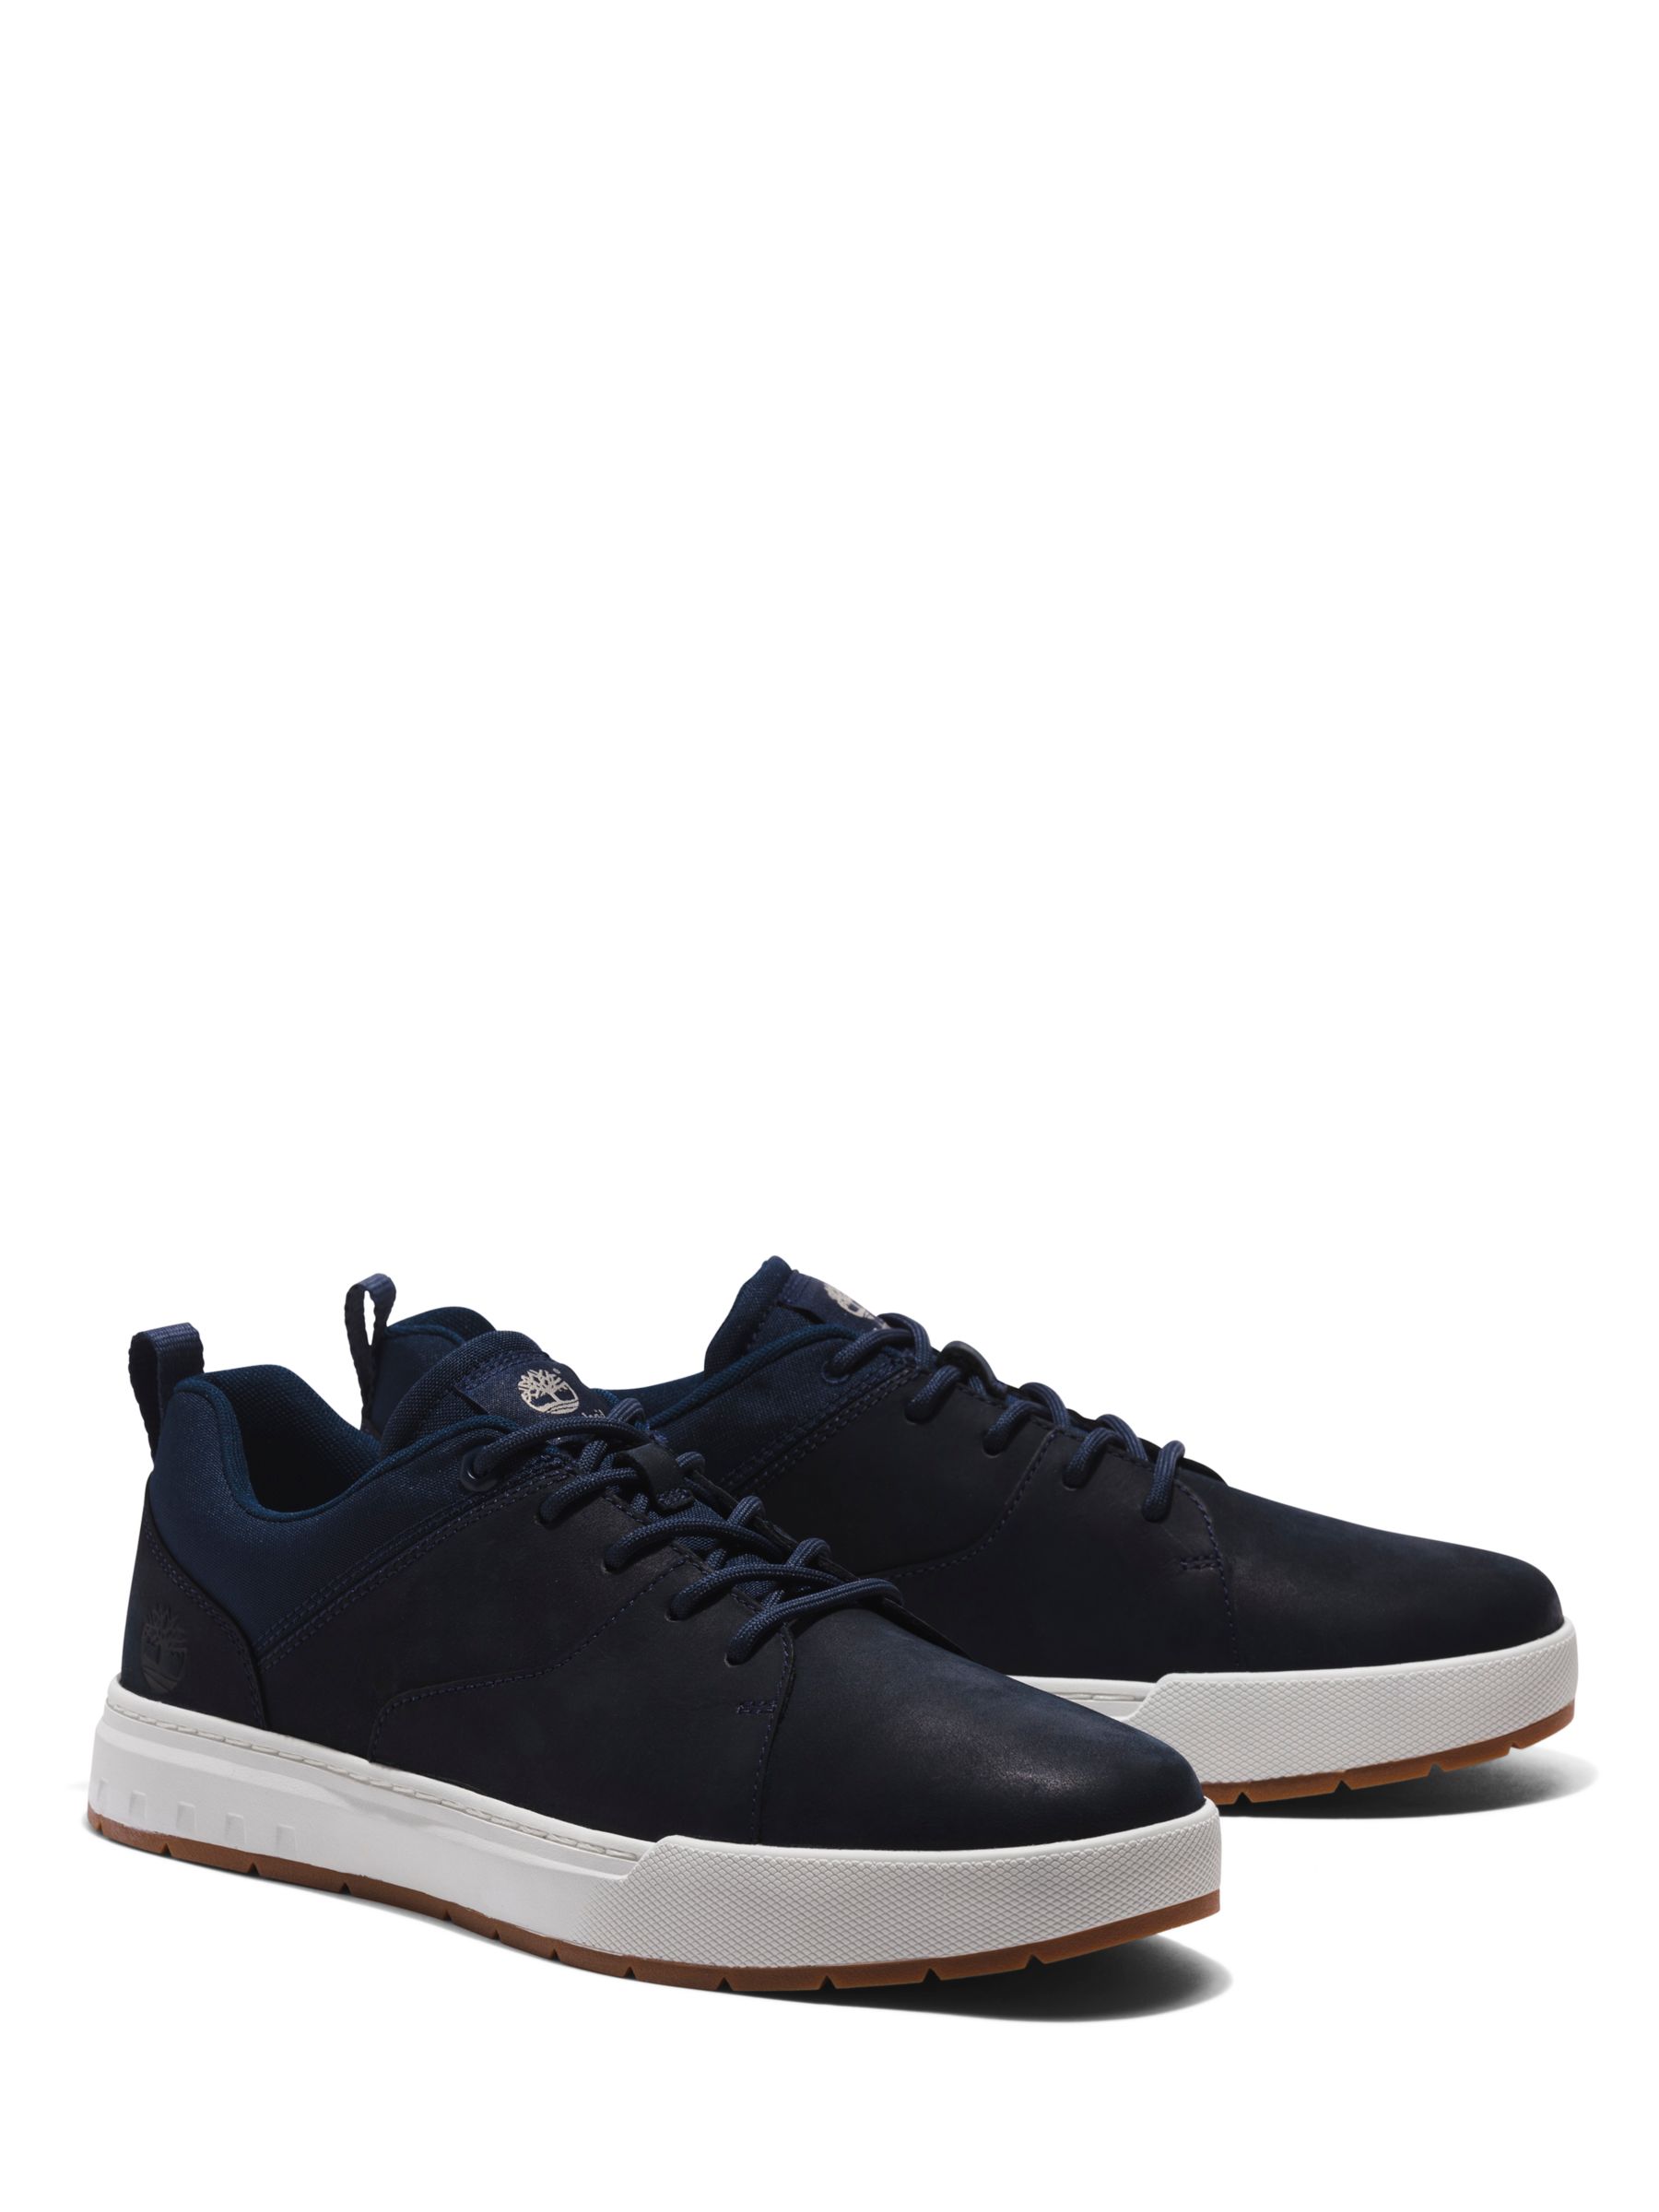 Timberland Maple Grove Trainers, Navy at John Lewis & Partners